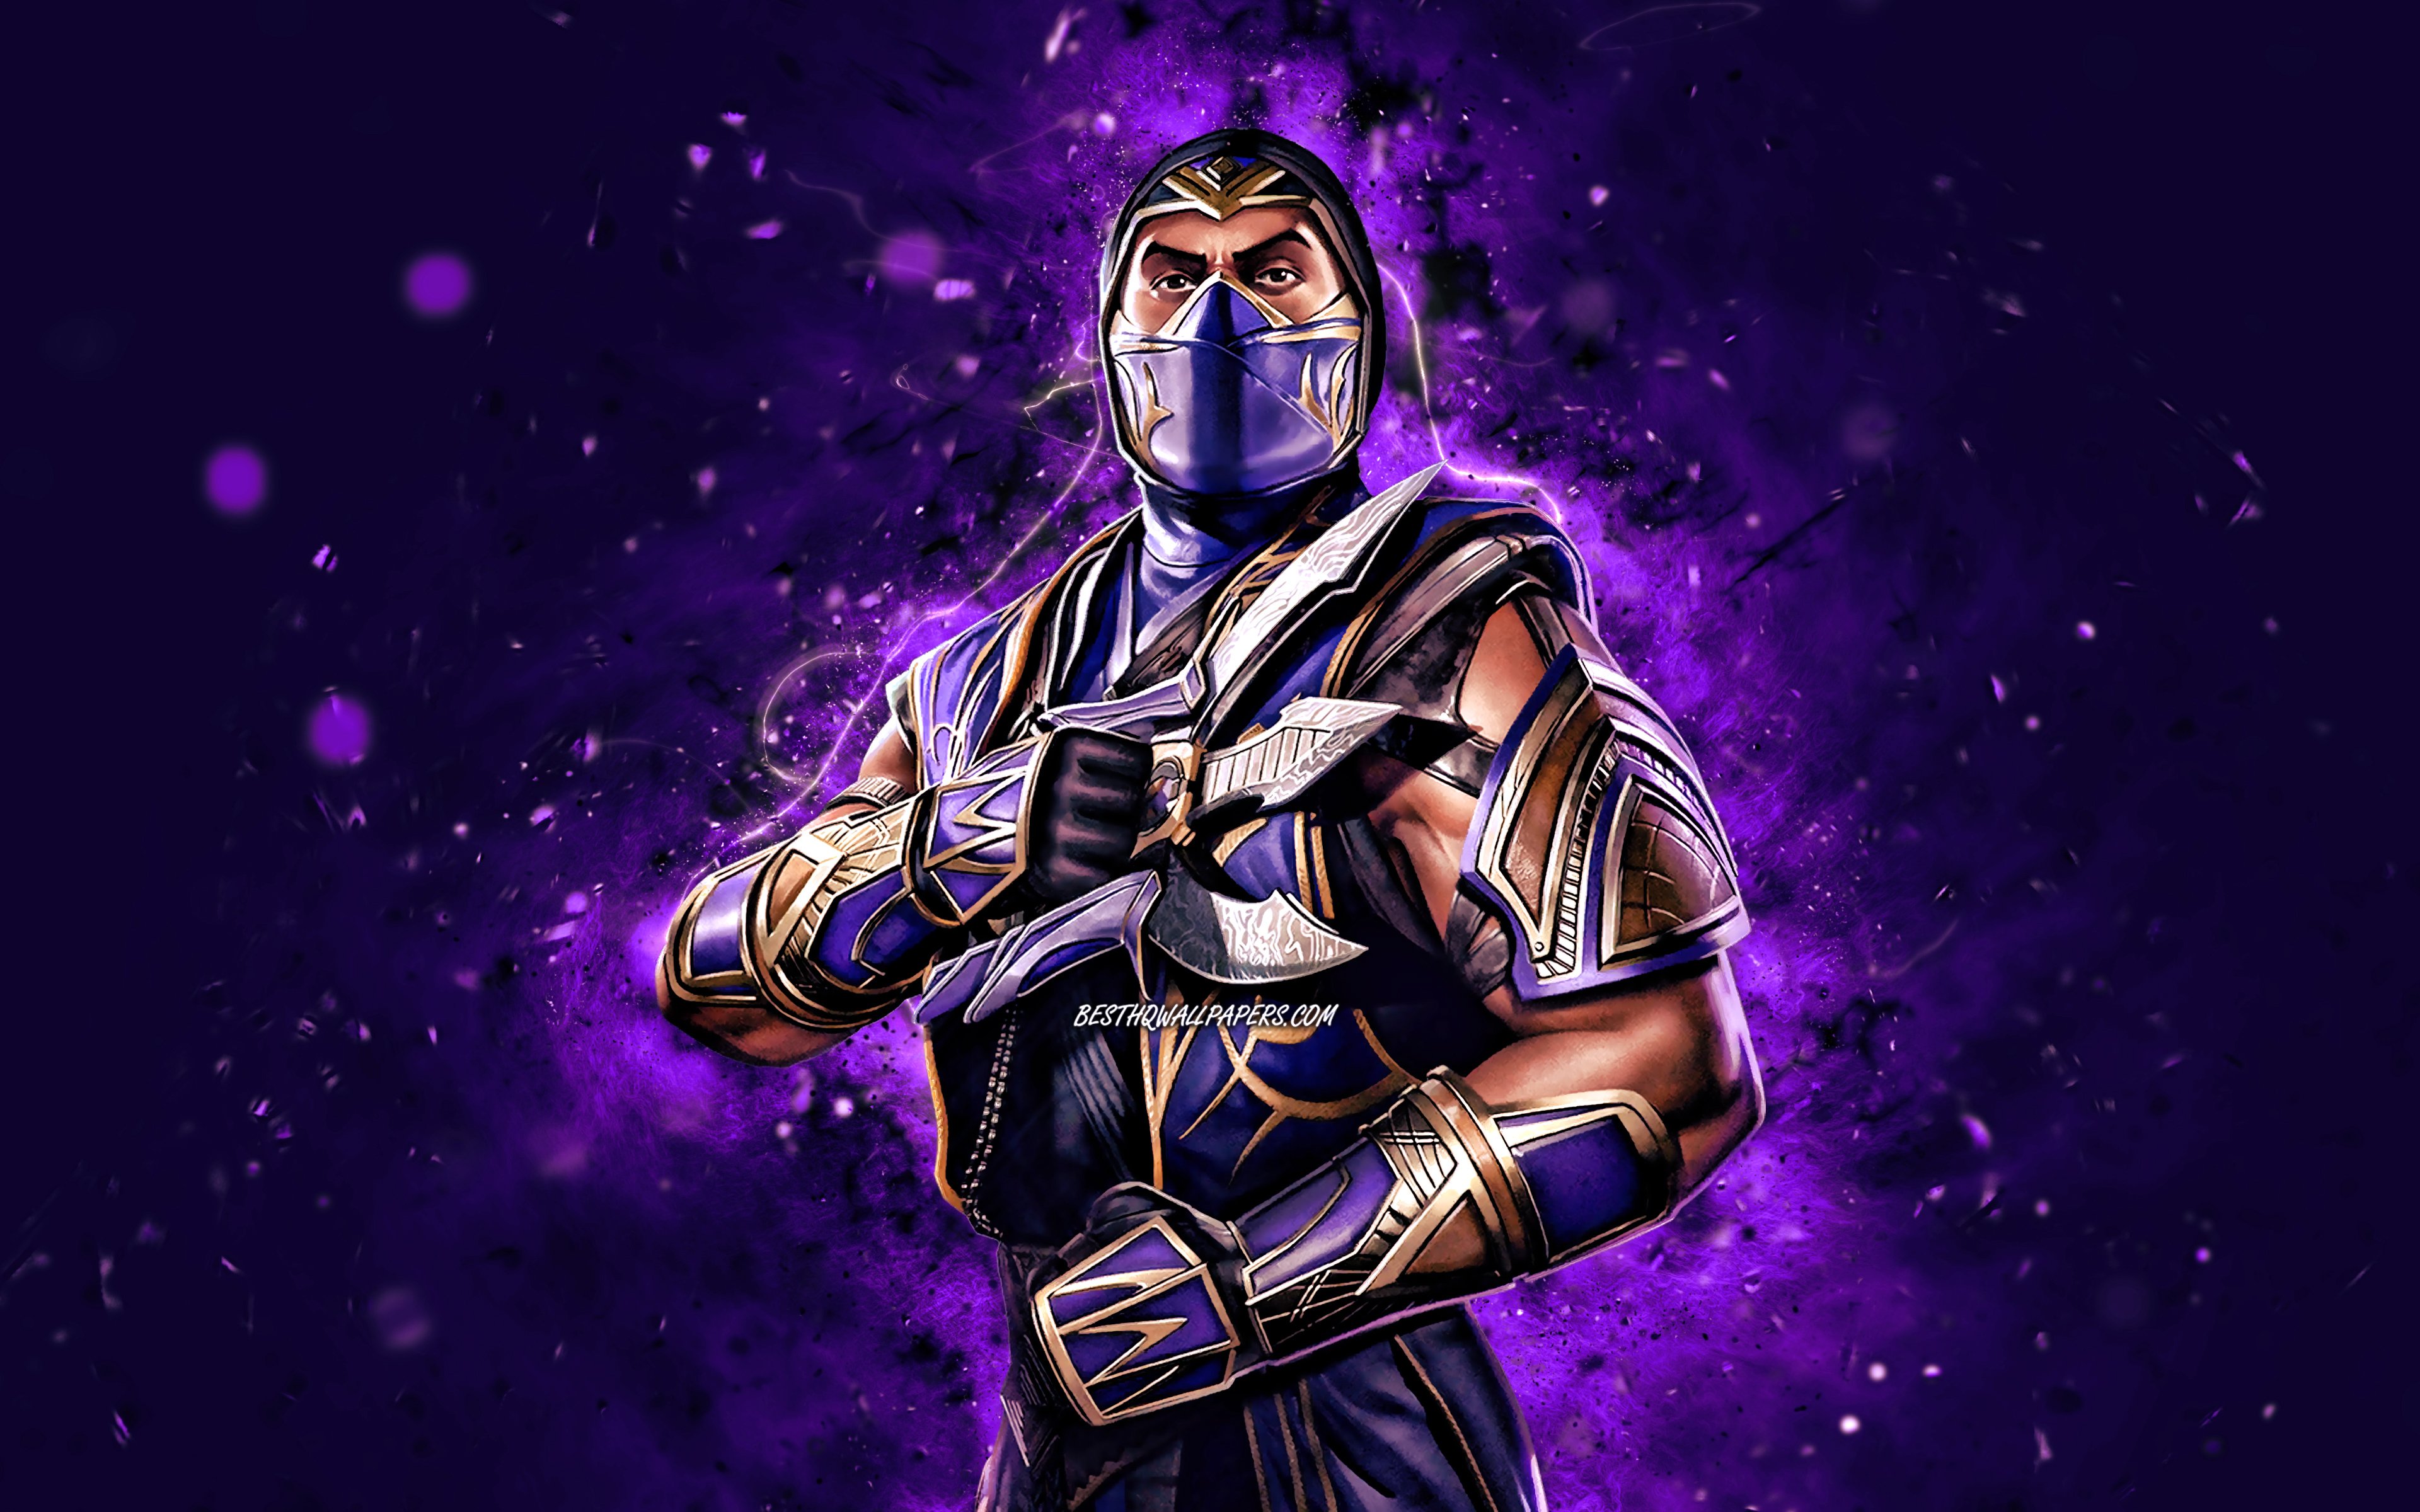 Download wallpaper Rain, 4k, violet neon lights, Mortal Kombat Mobile, fighting games, MK Mobile, creative, Mortal Kombat, Rain Mortal Kombat for desktop with resolution 3840x2400. High Quality HD picture wallpaper